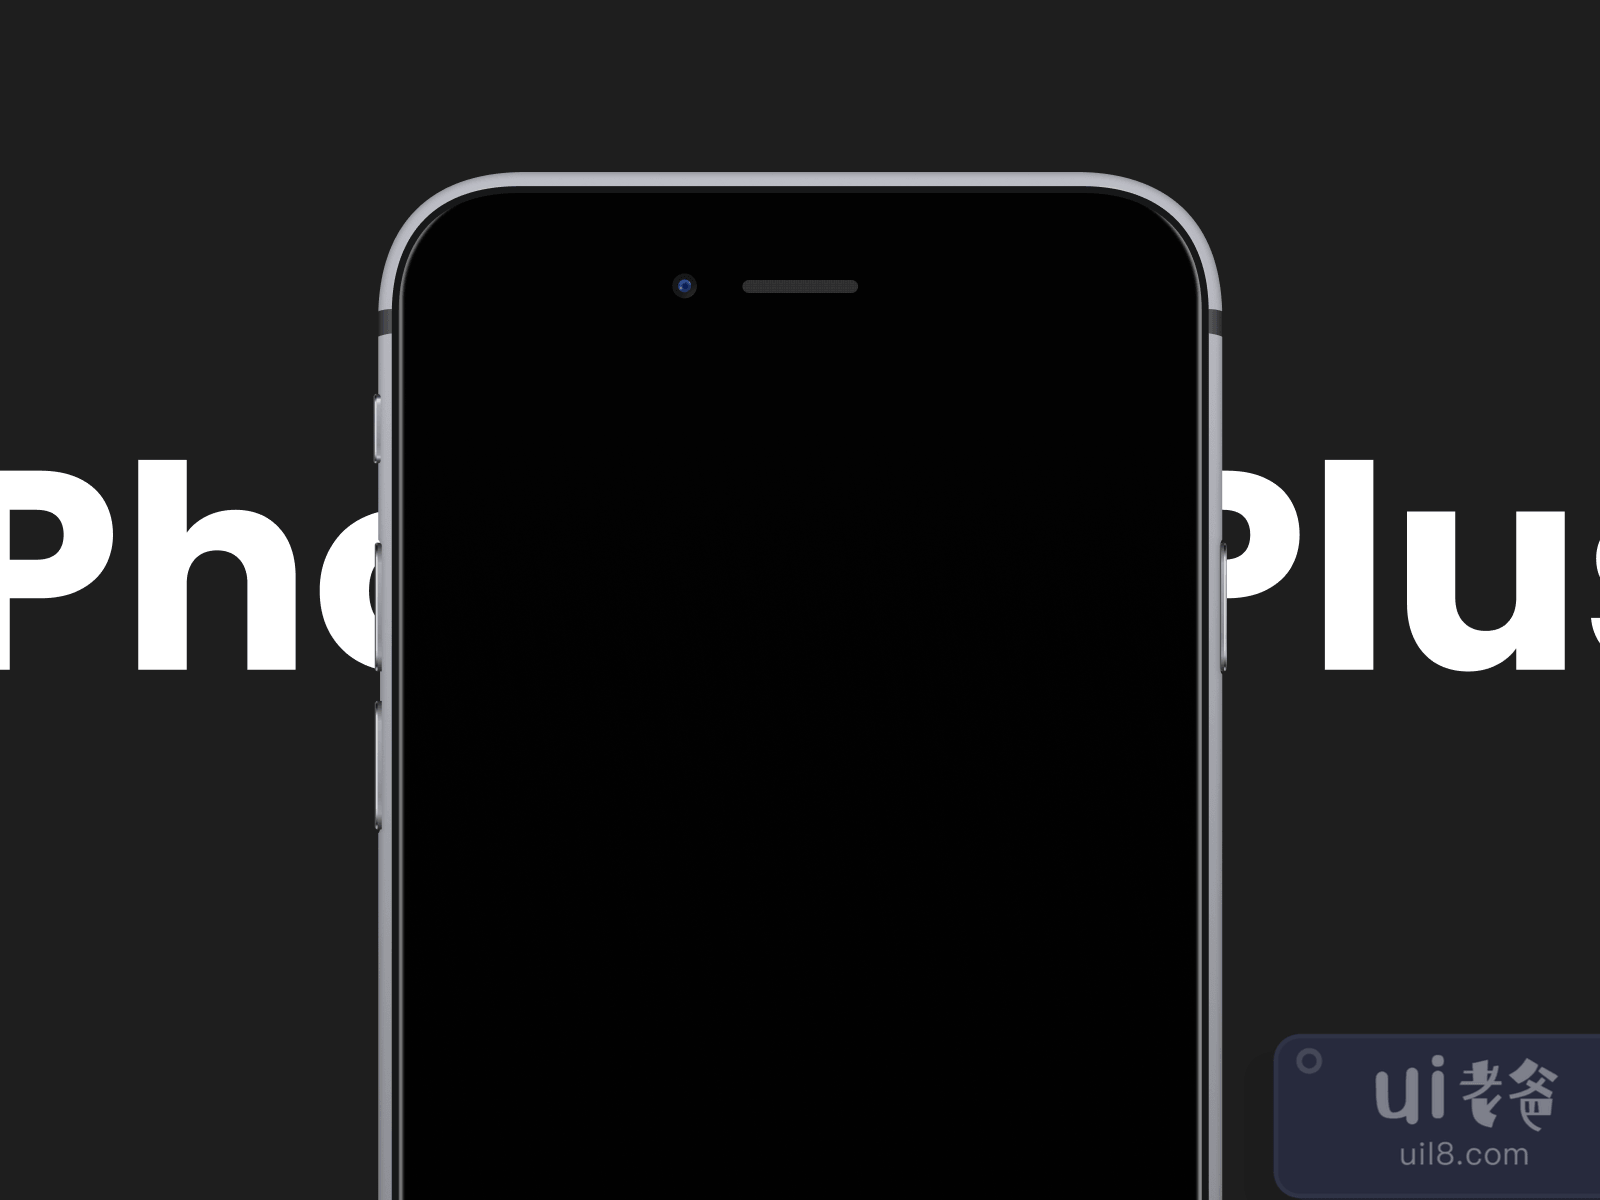 iPhone 7 Plus Black Mockup for Figma and Adobe XD No 3